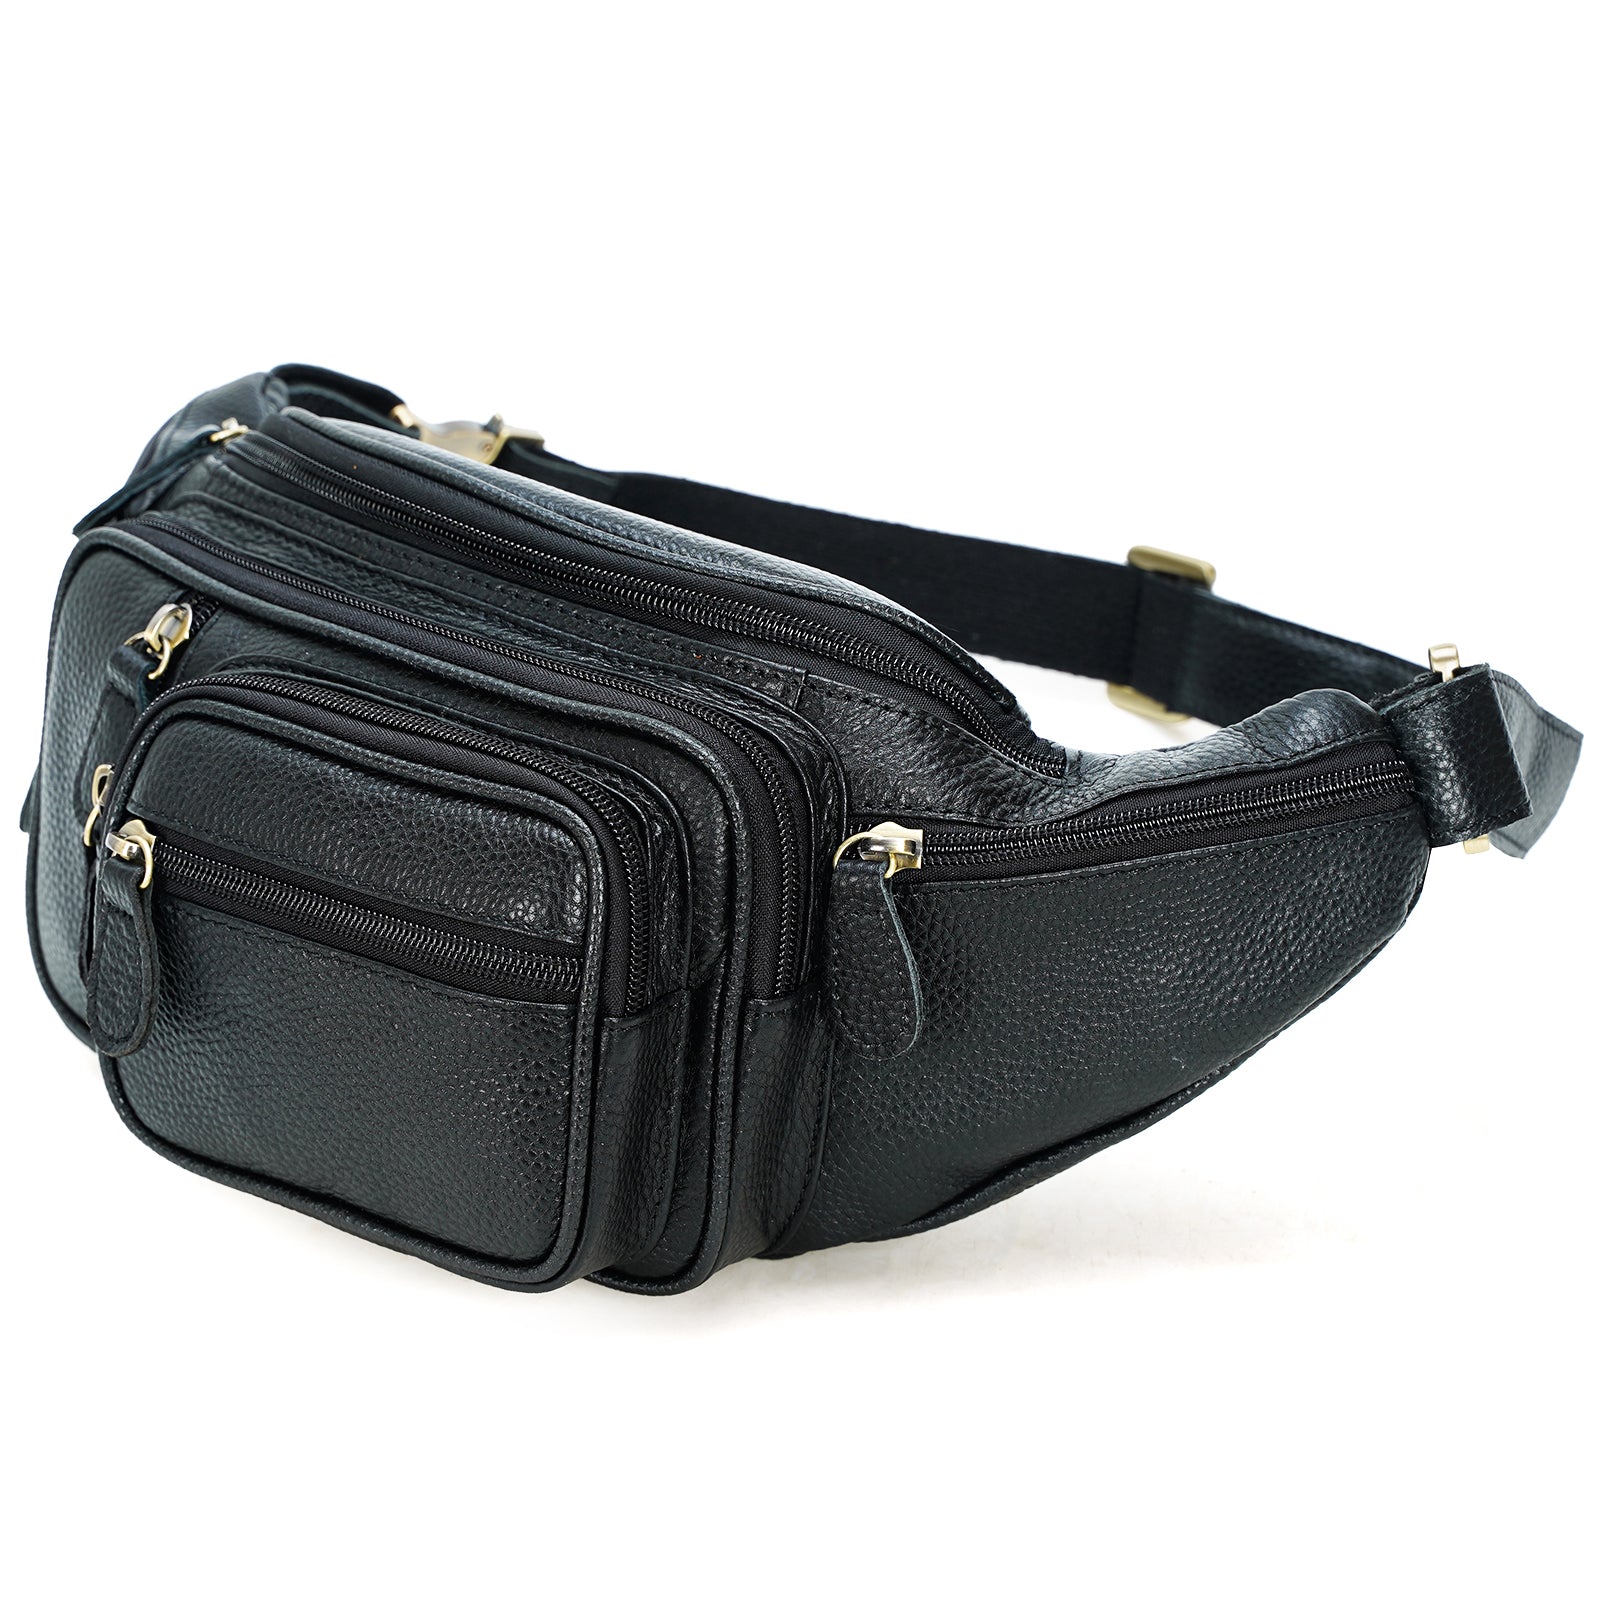 Polare Cowhide Leather Fanny Pack Waist Bag Organizer with Adjustable Belt for Men and Women